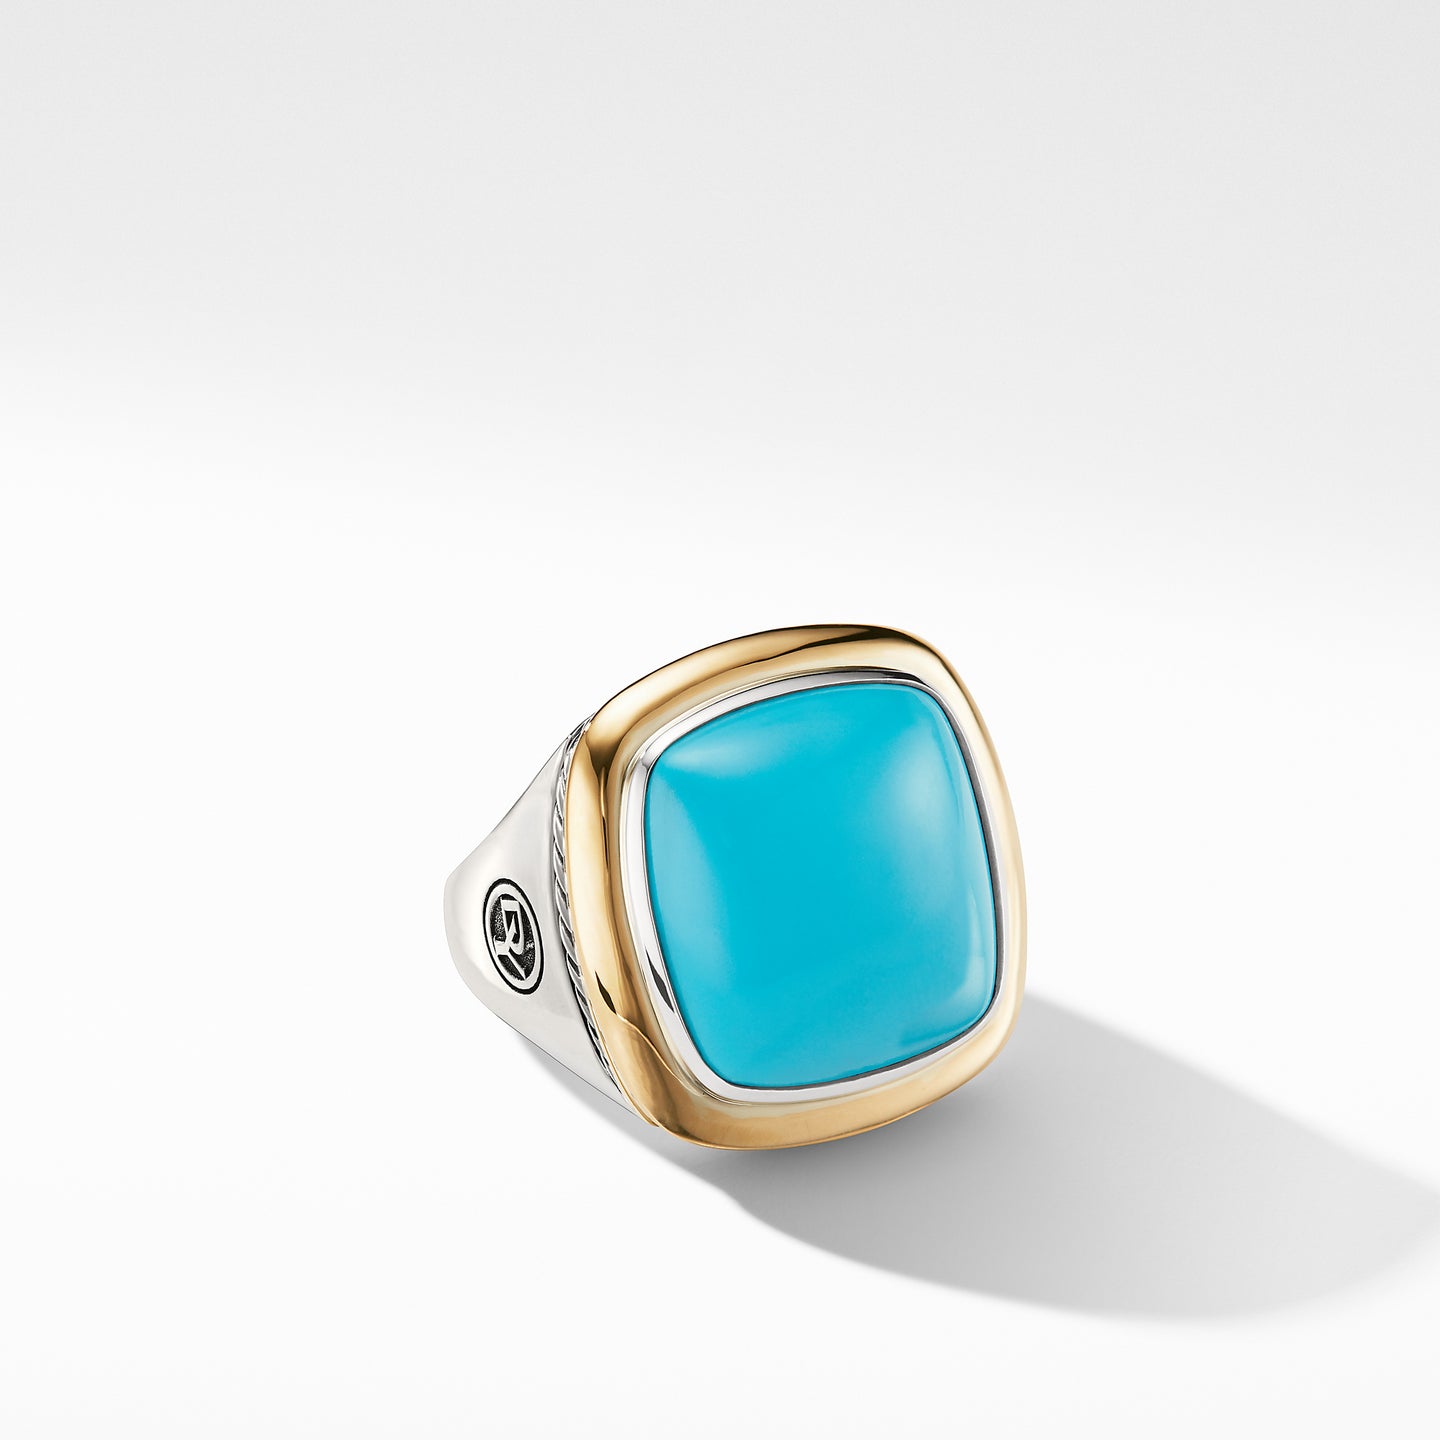 Albion® Statement Ring with 18K Gold and Reconstituted Turquoise, Size 8